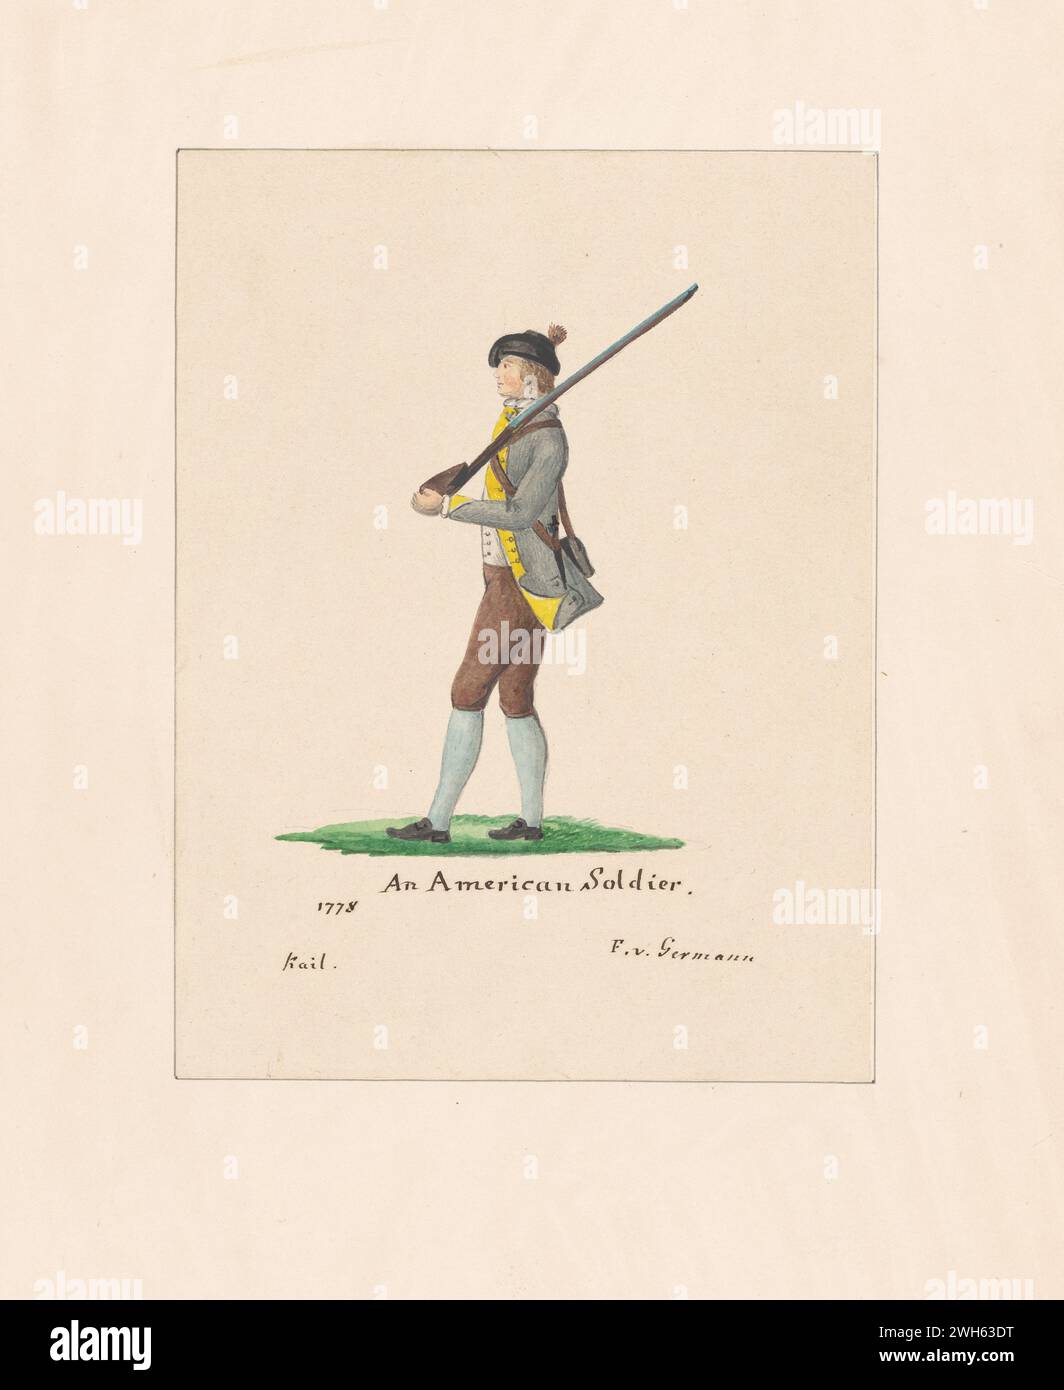 “Watercolor of an American Soldier during the American Revolutionary War” circa 1778. From a series of prints by Friedrich von German captain of a regiment from Hesse-Hanau, one of the many German auxiliary troops hired by George III to fight in the American Revolution. He arrived in North America in 1775 During the war, he painted a series of watercolors of American, British, and German soldiers. Stock Photo